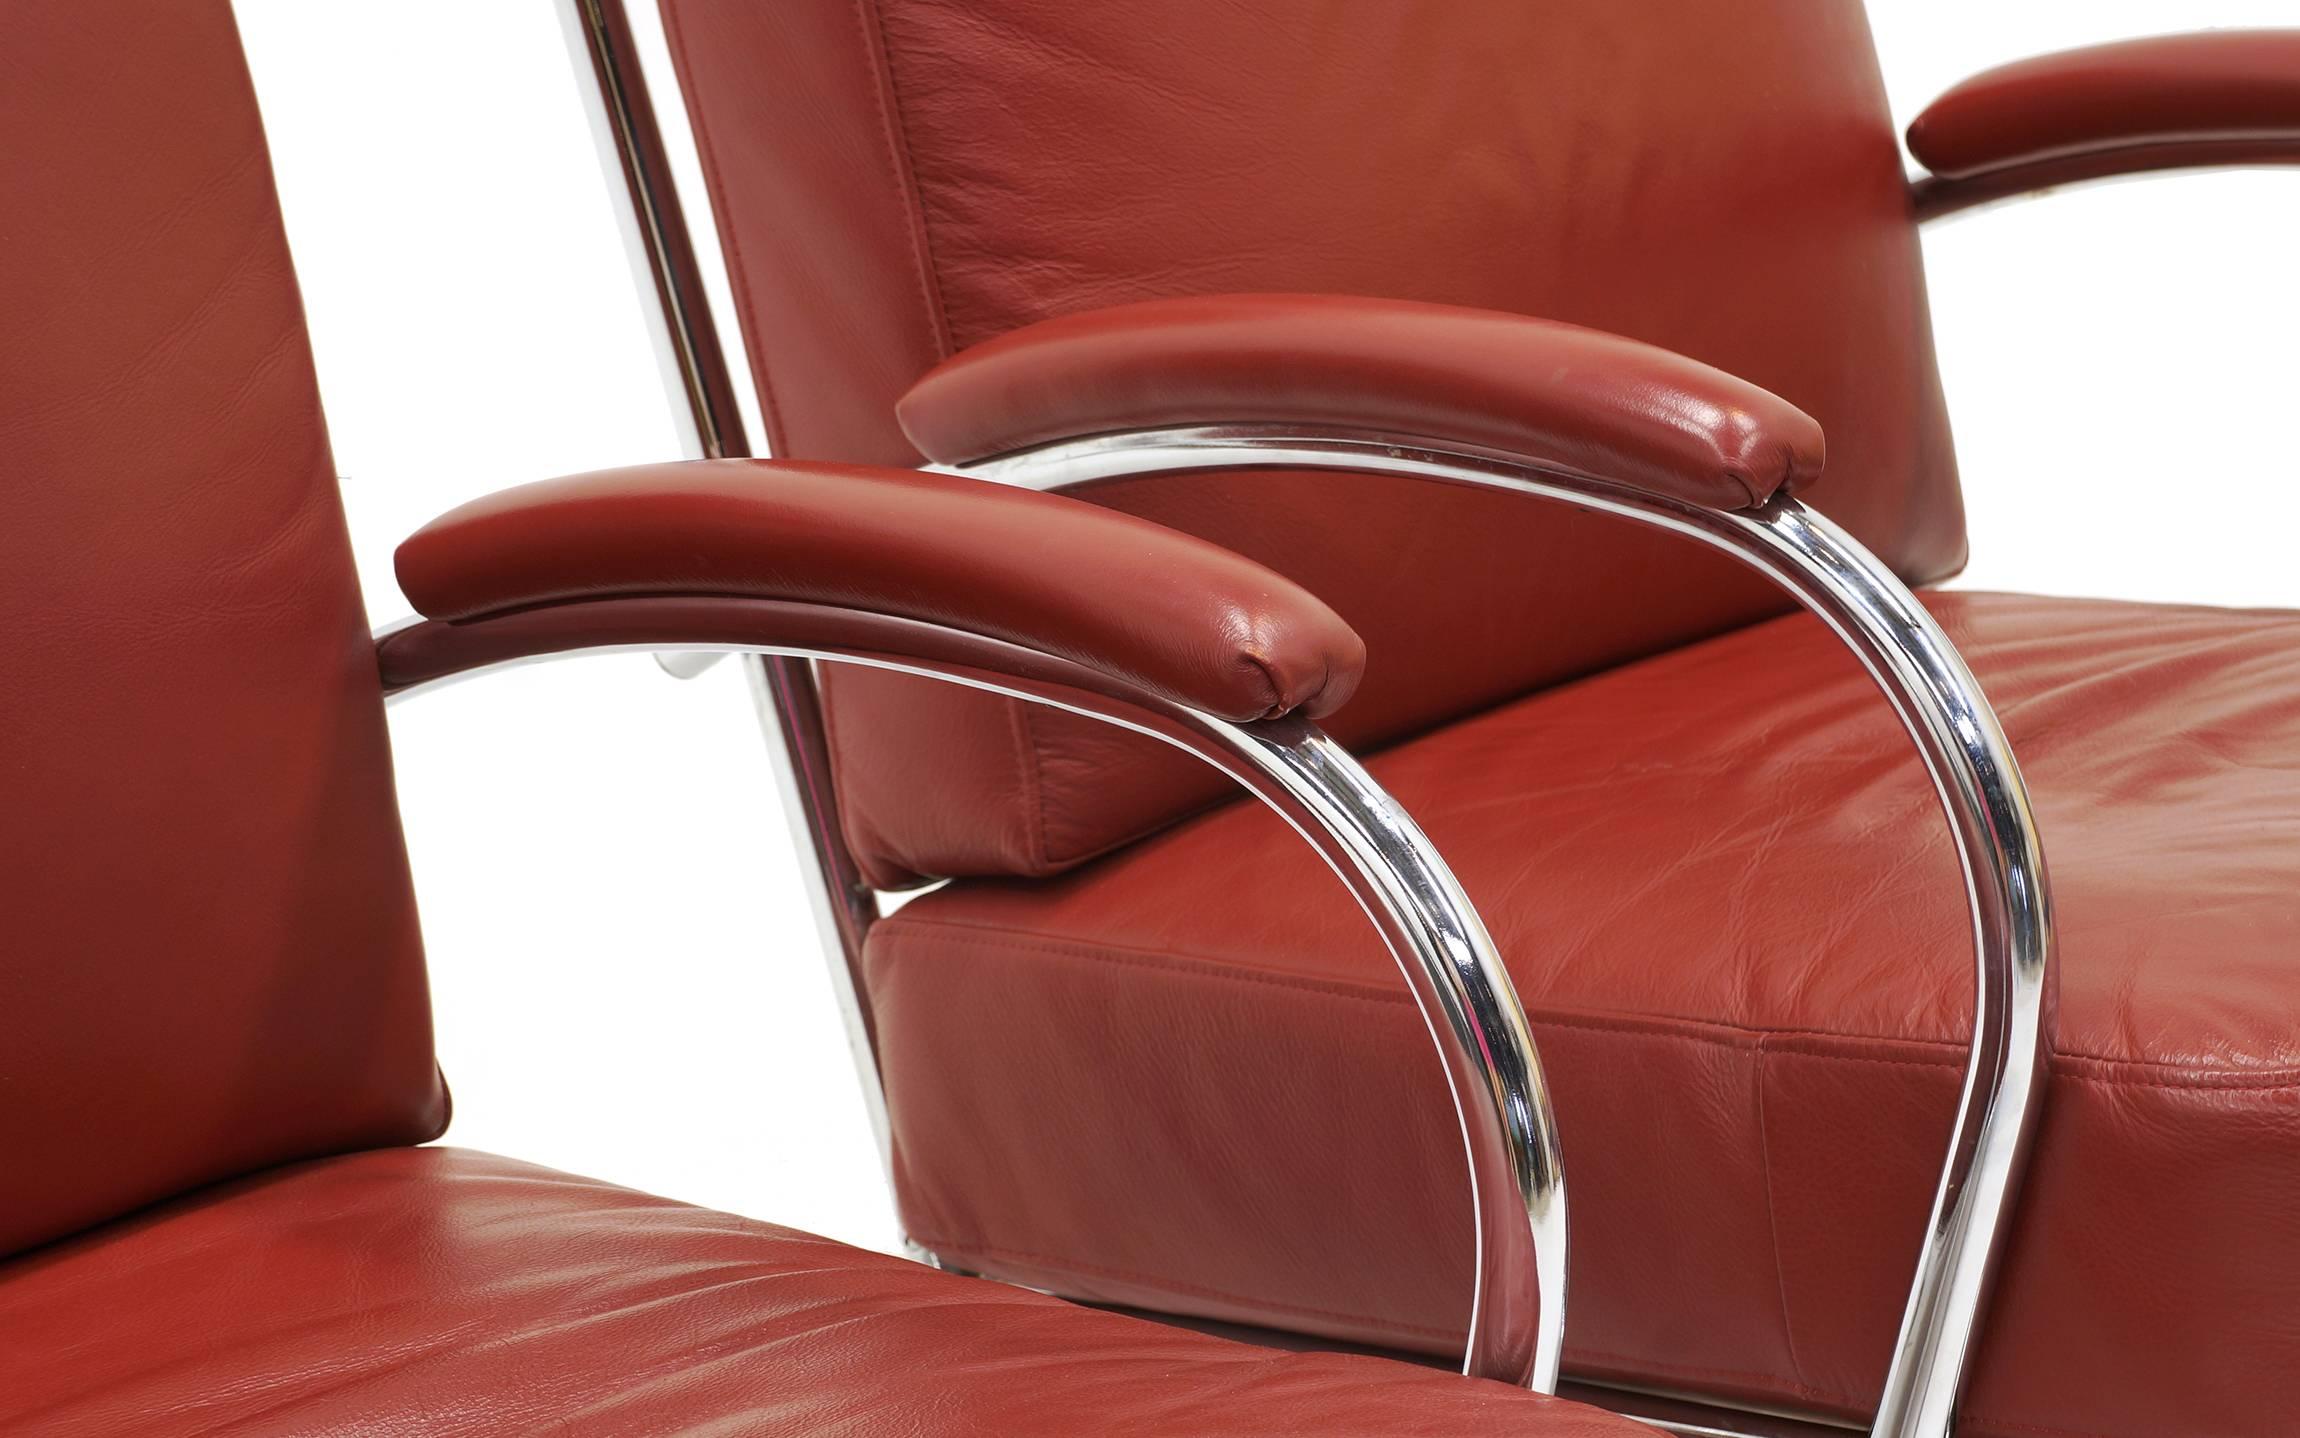 American Pair of Tubular Chrome and Red Leather Lounge Chairs by KEM Weber for Lloyd